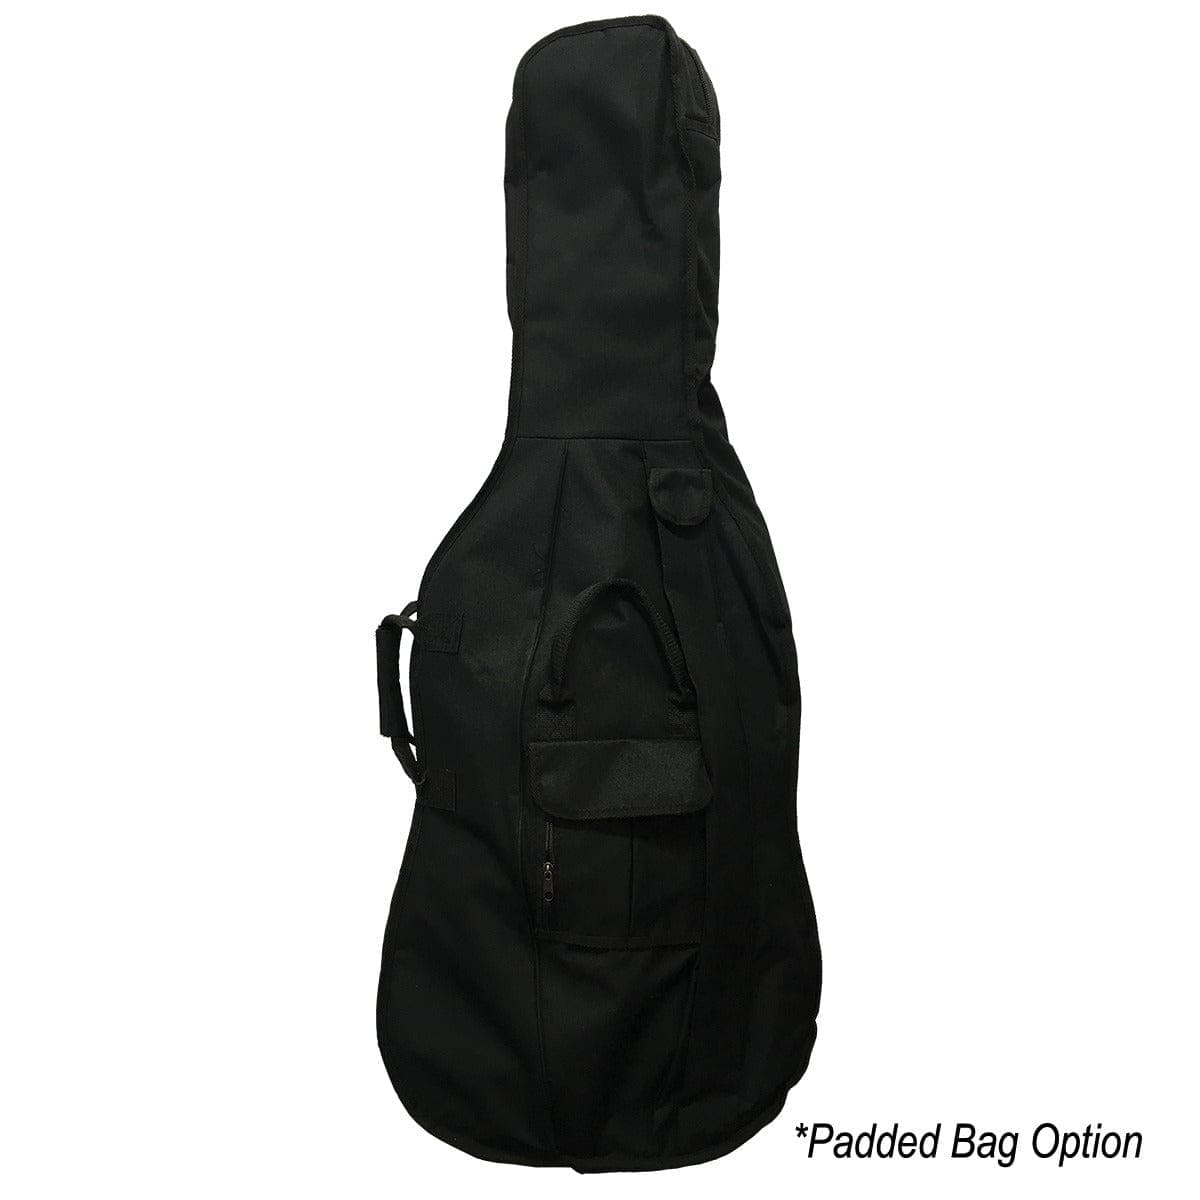 Vivo Student 3/4 Cello Outfit with Bag